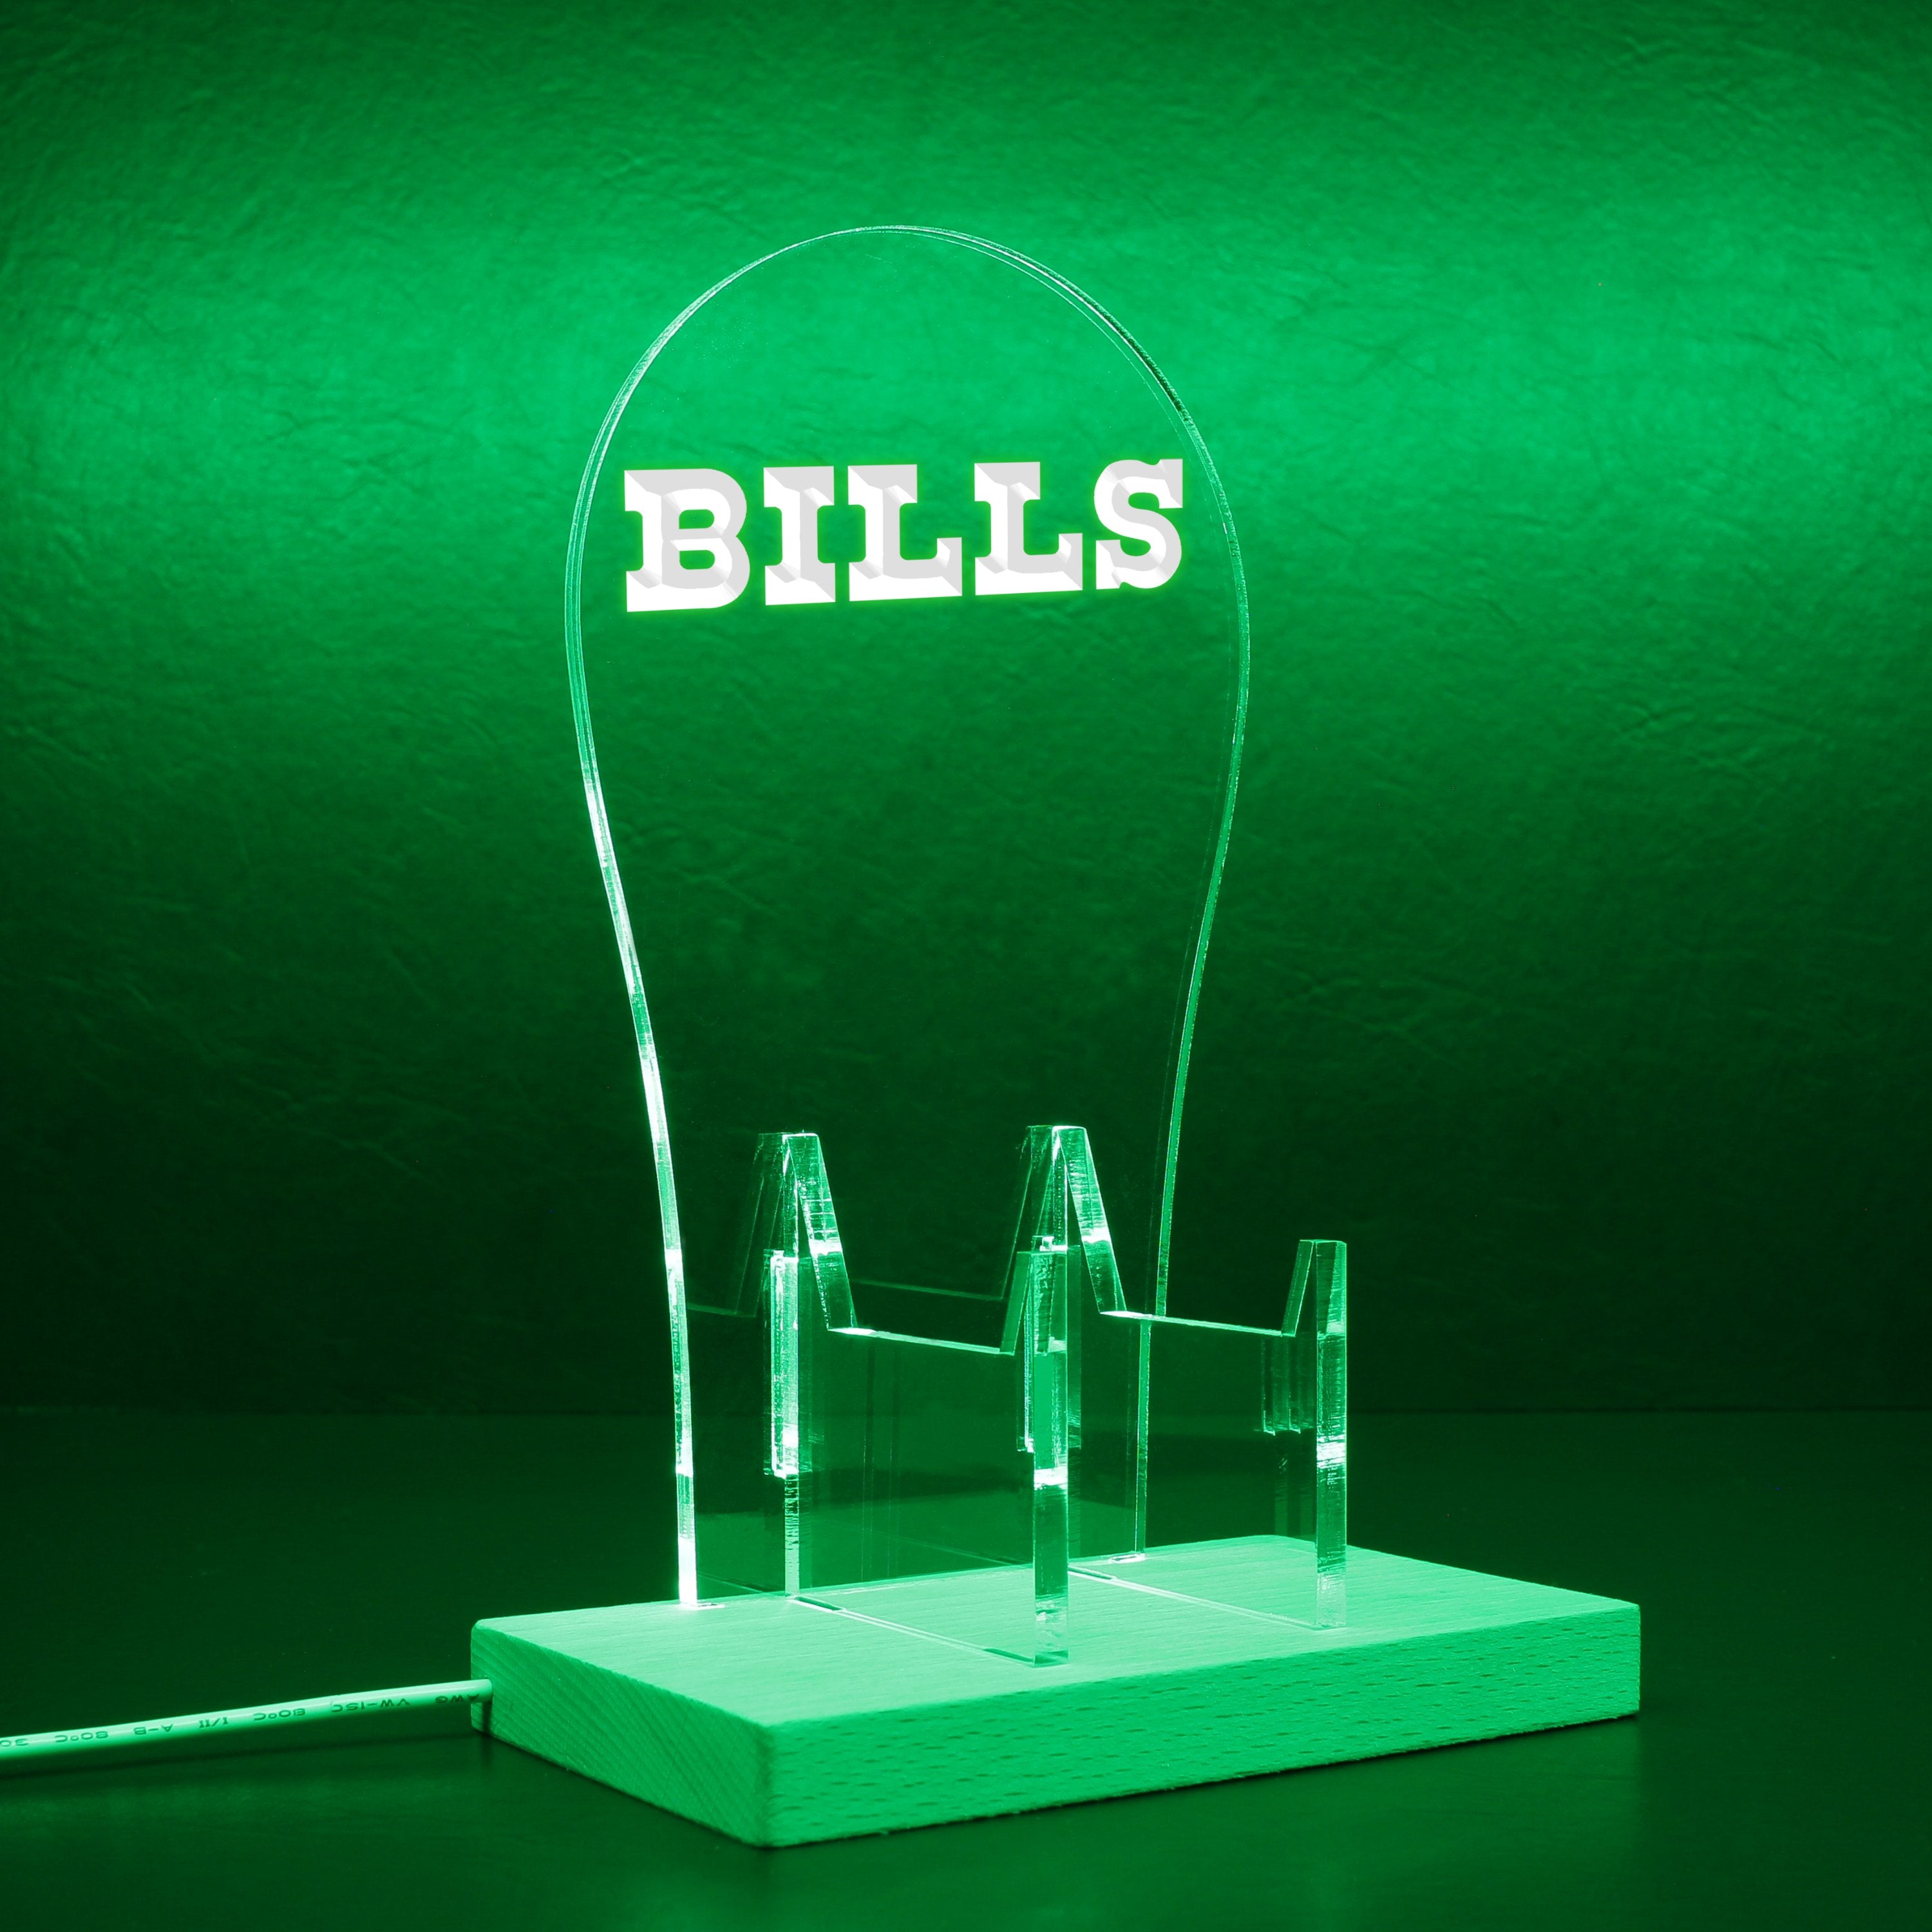 Buffalo Bills script logo in use since 1974 RGB LED Gaming Headset Controller Stand